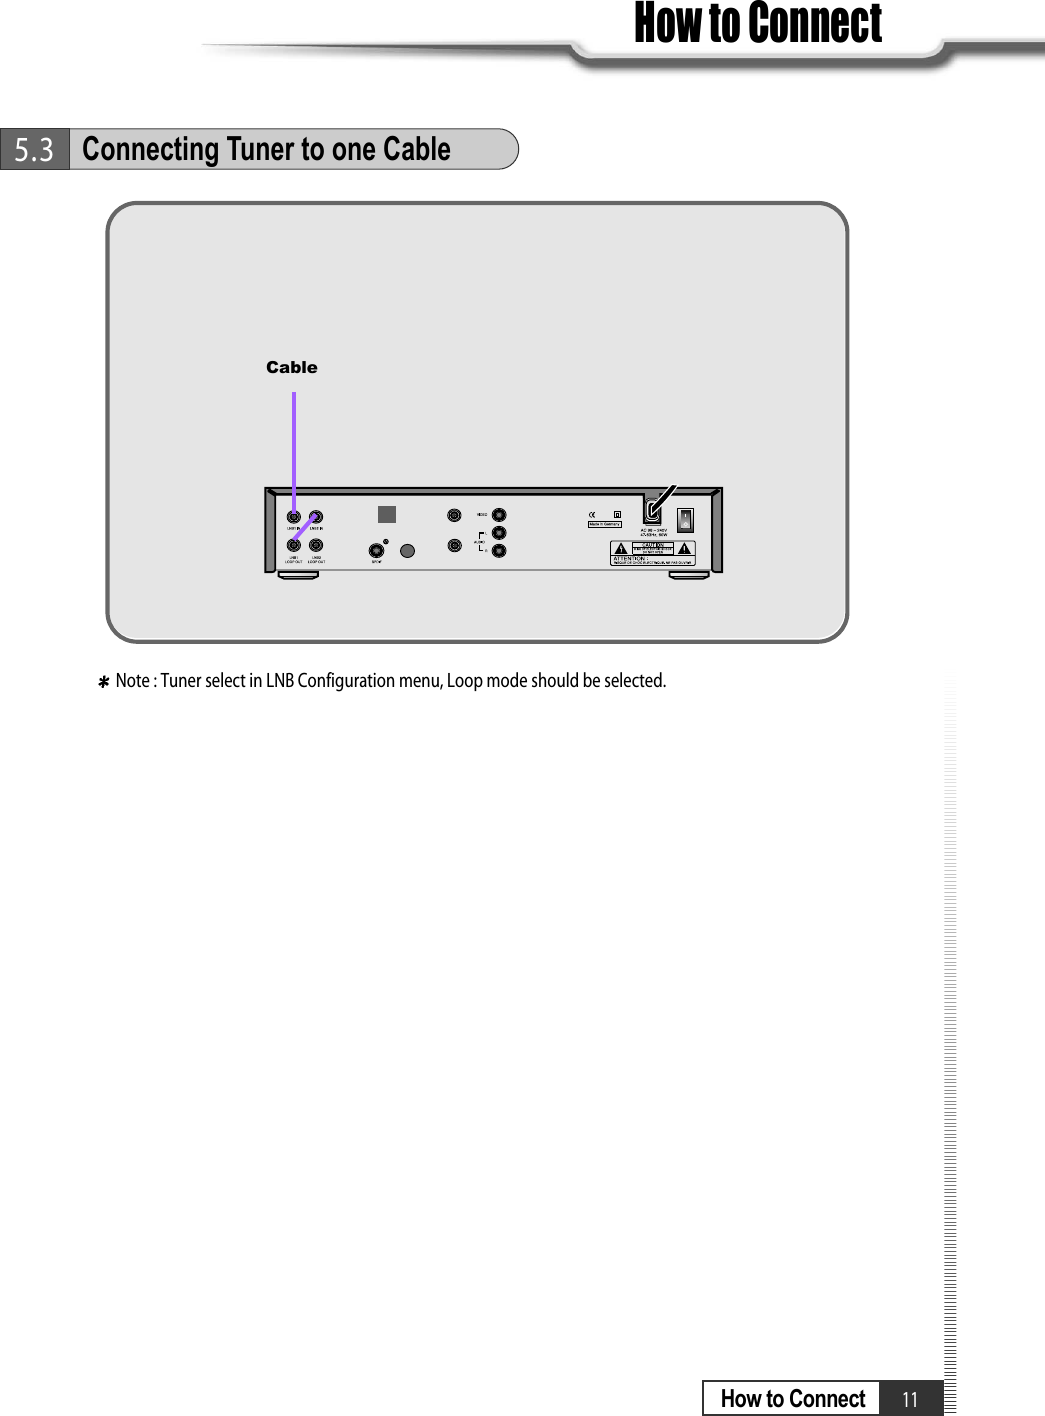 11How to ConnectHow to ConnectNote : Tuner select in LNB Configuration menu, Loop mode should be selected.5.3Connecting Tuner to one CableCable